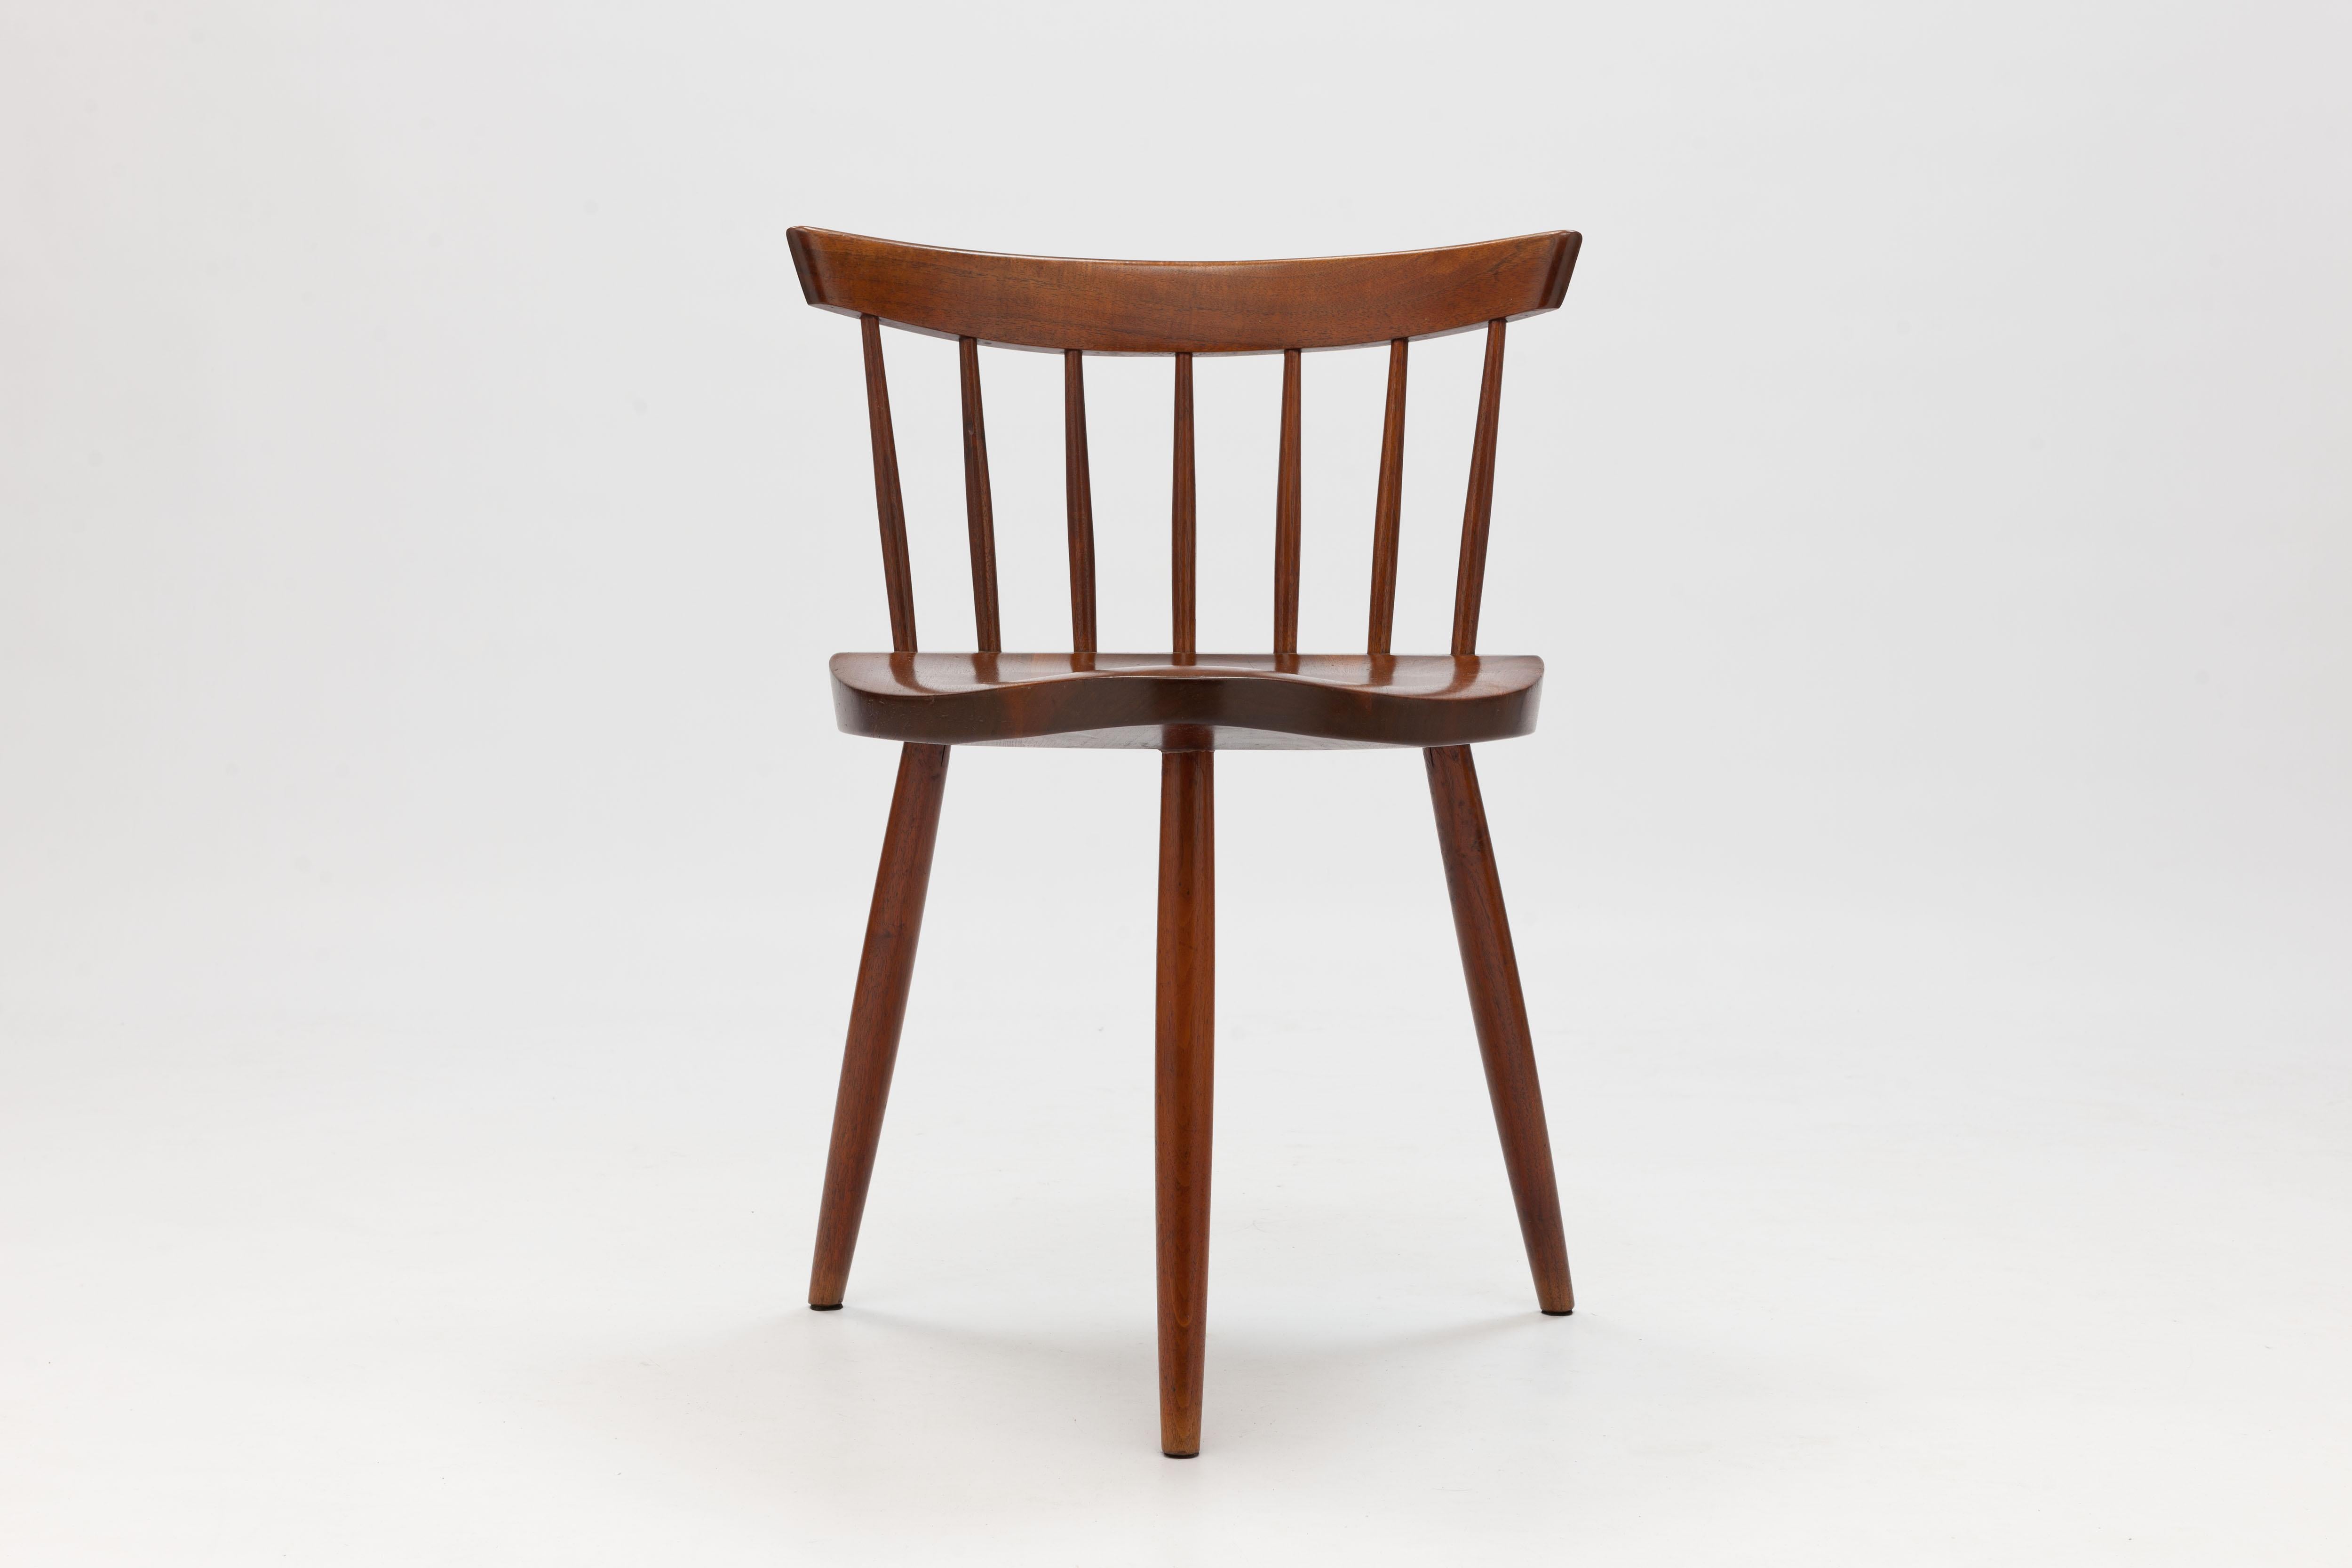 Named after his daughter, the Mira Chair was originally designed by George Nakashima - architect, designer and master cabinetmaker - around 1950.
The chair has a triangular seat which is supported by three turned legs. A variation on a